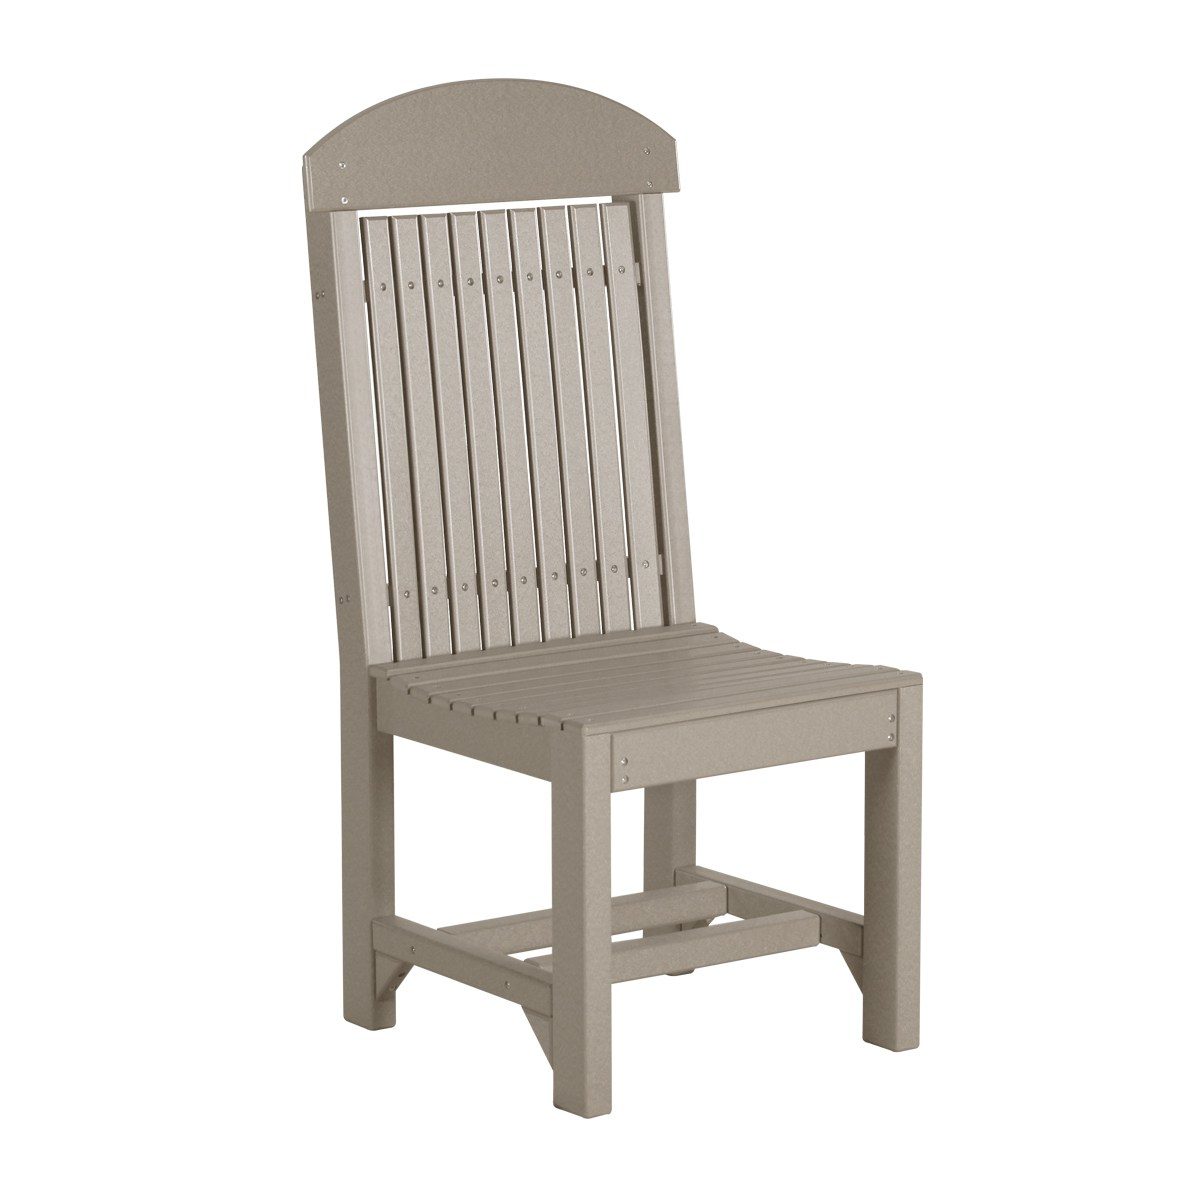 Classic Dining Chair - Weatherwood